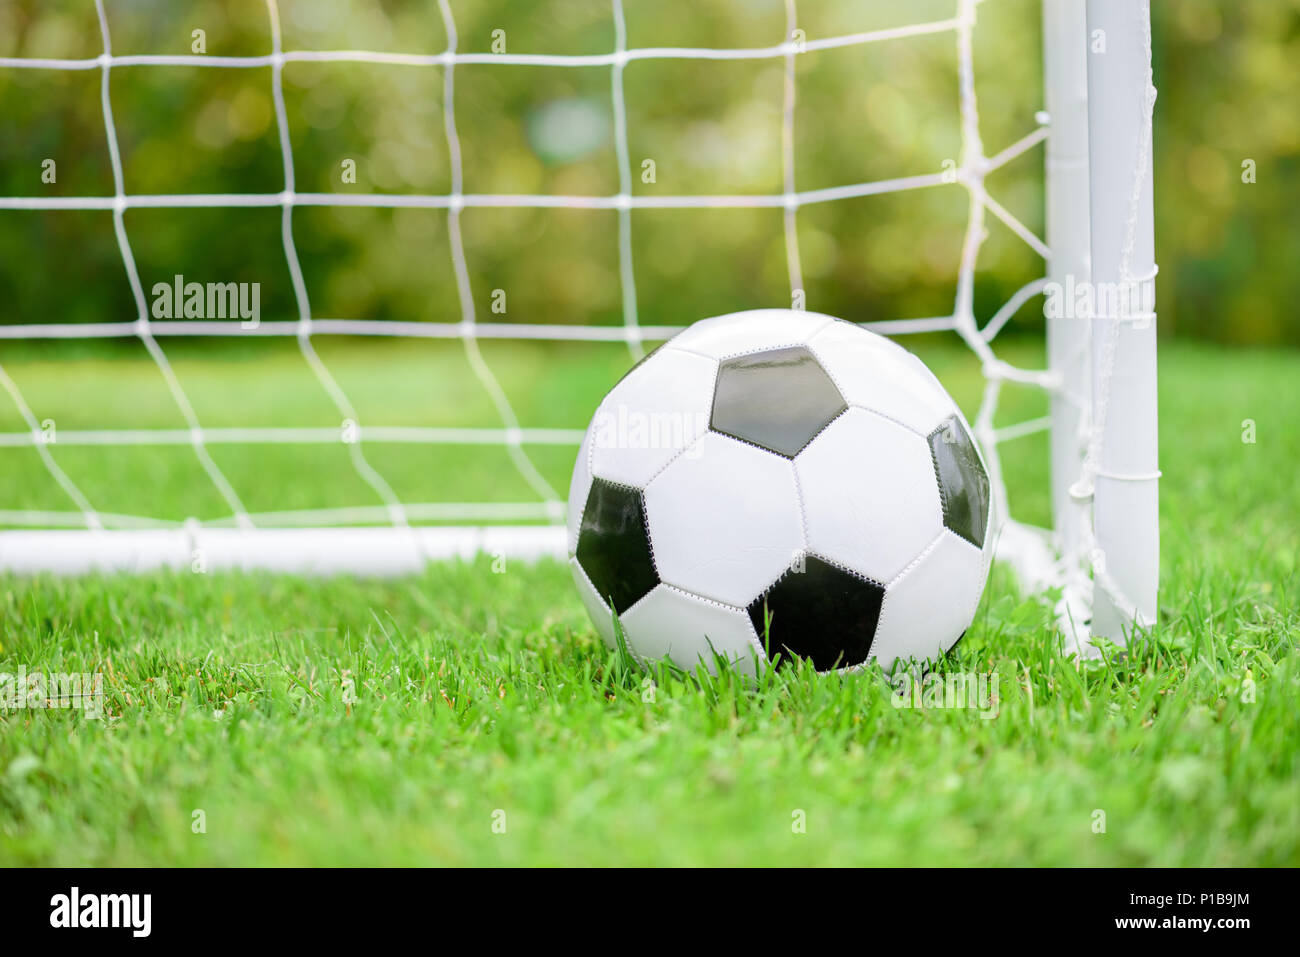 Classic football (soccer) ball on green grass ground in front of white goal with net Stock Photo